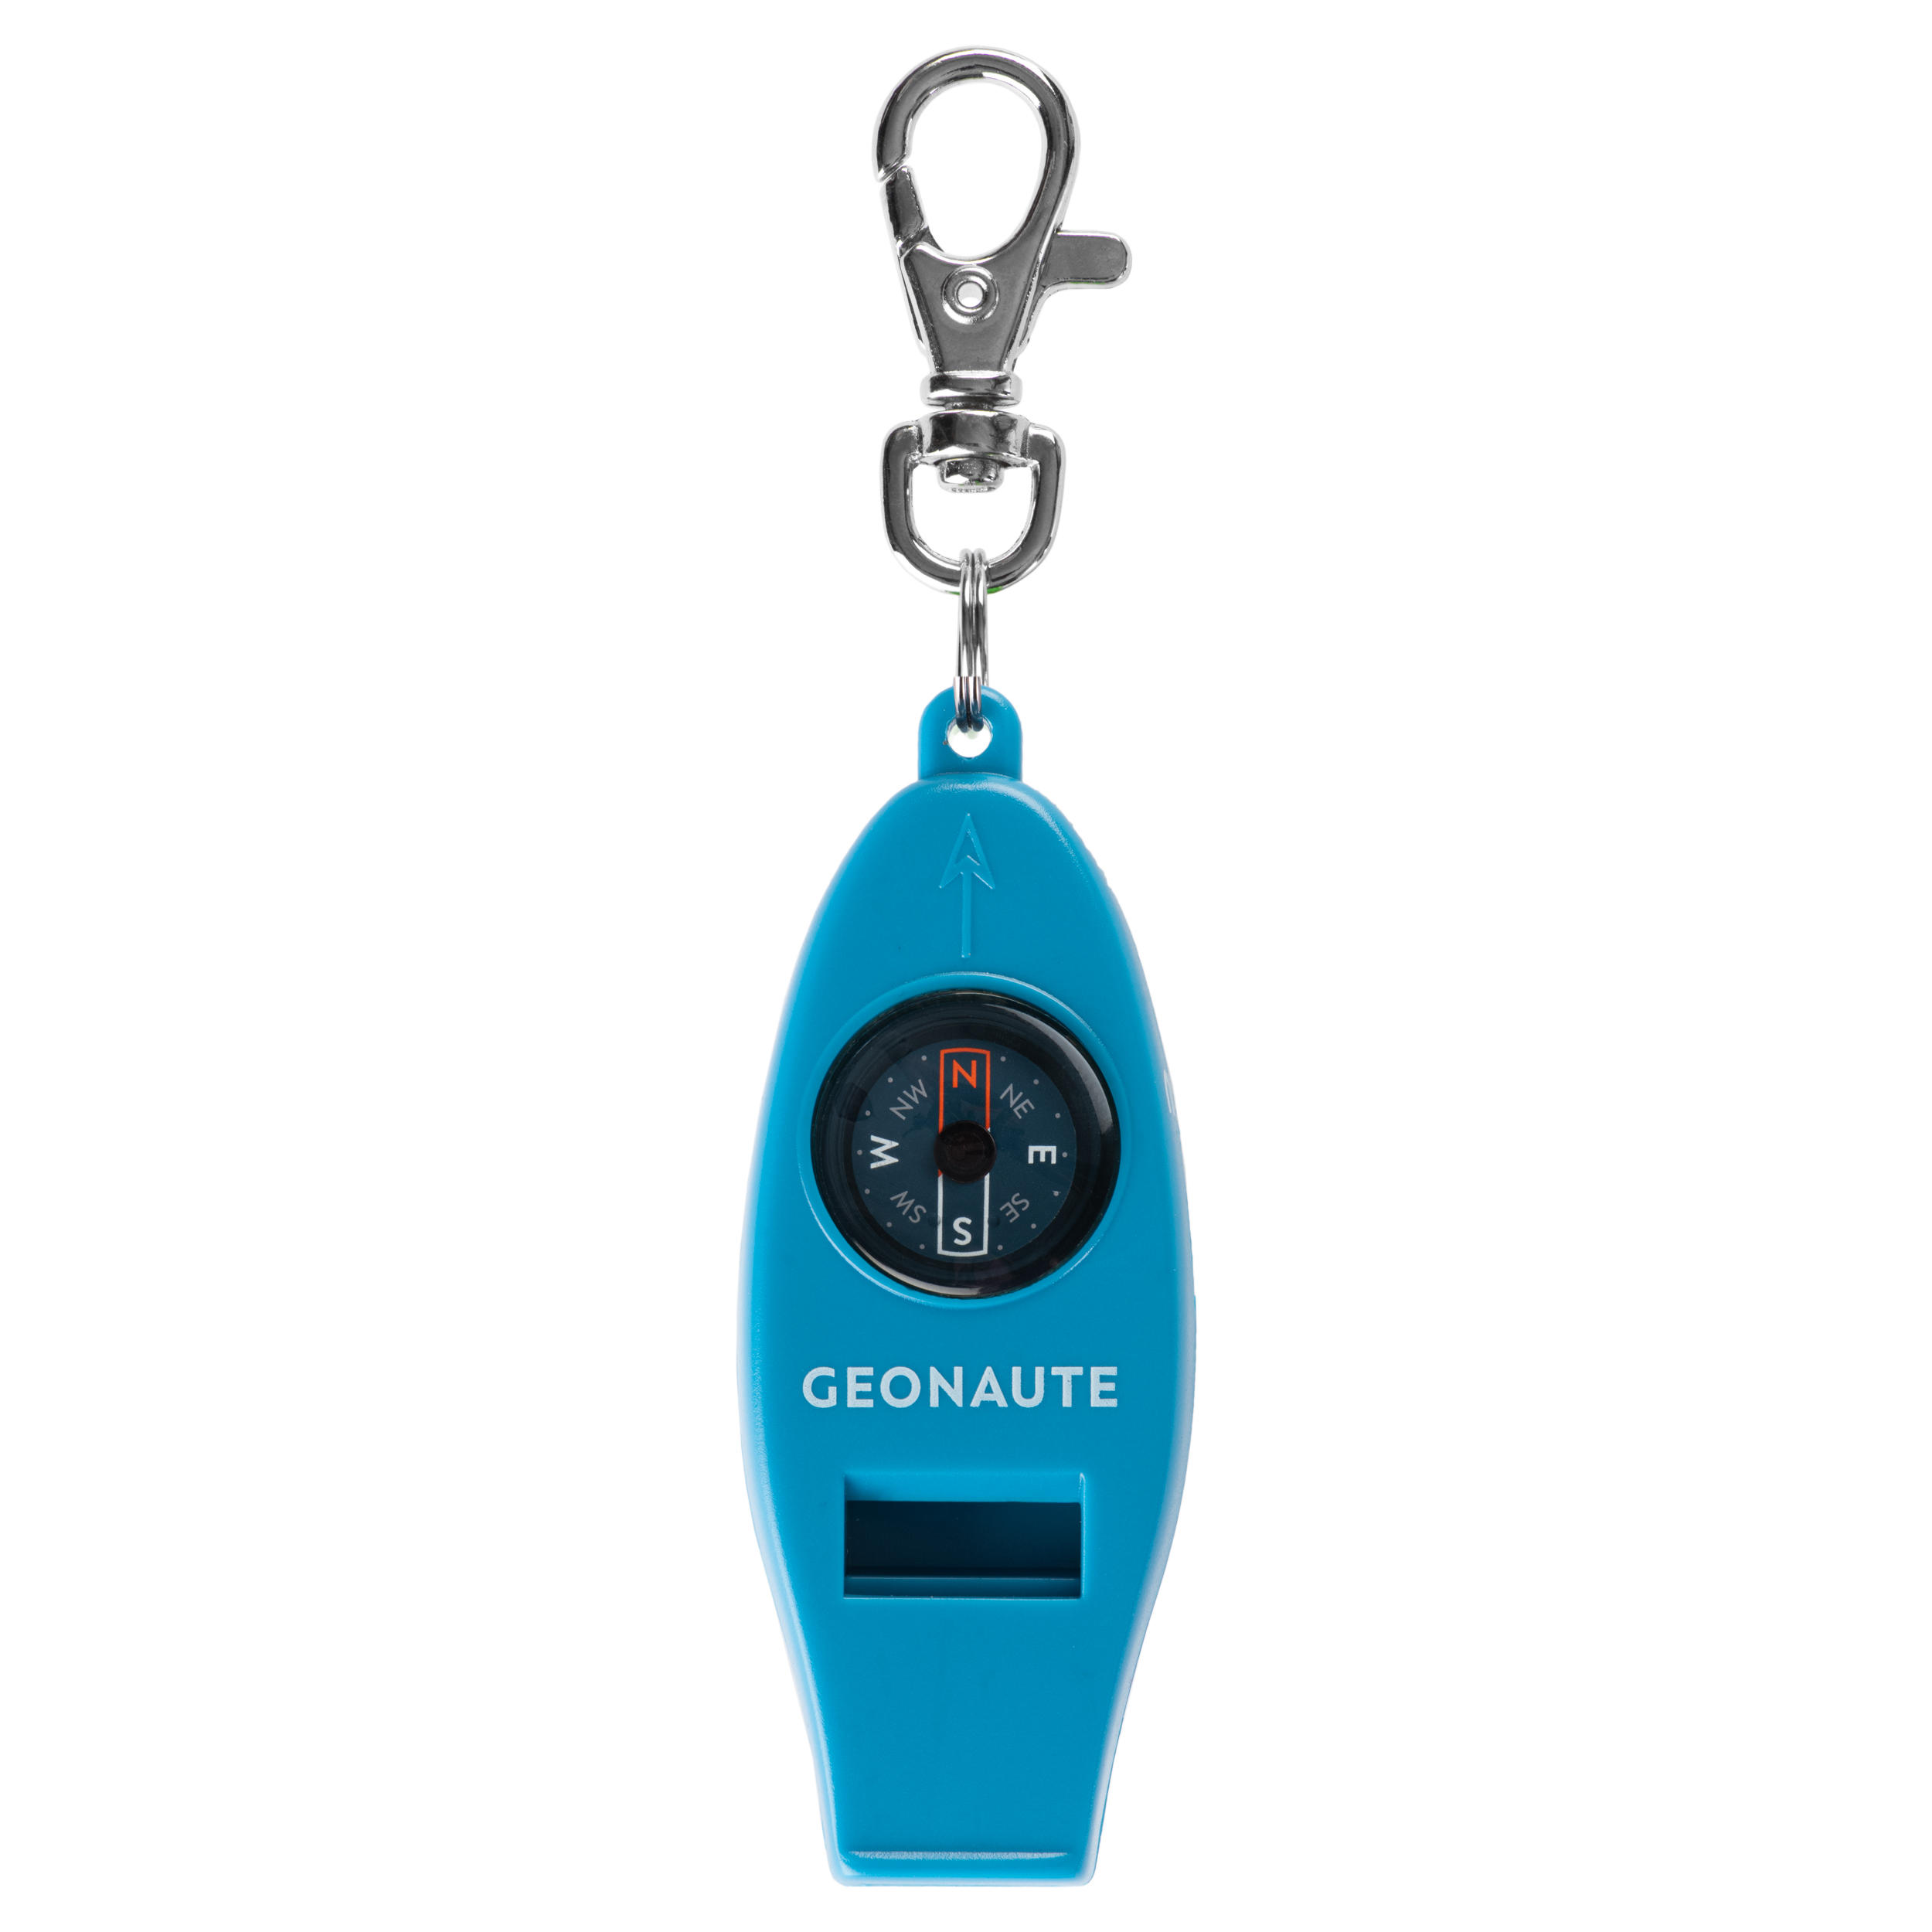 50 Multi-Purpose Whistle and Orienteering Compass - Blue - No Size By GEONAUTE | Decathlon